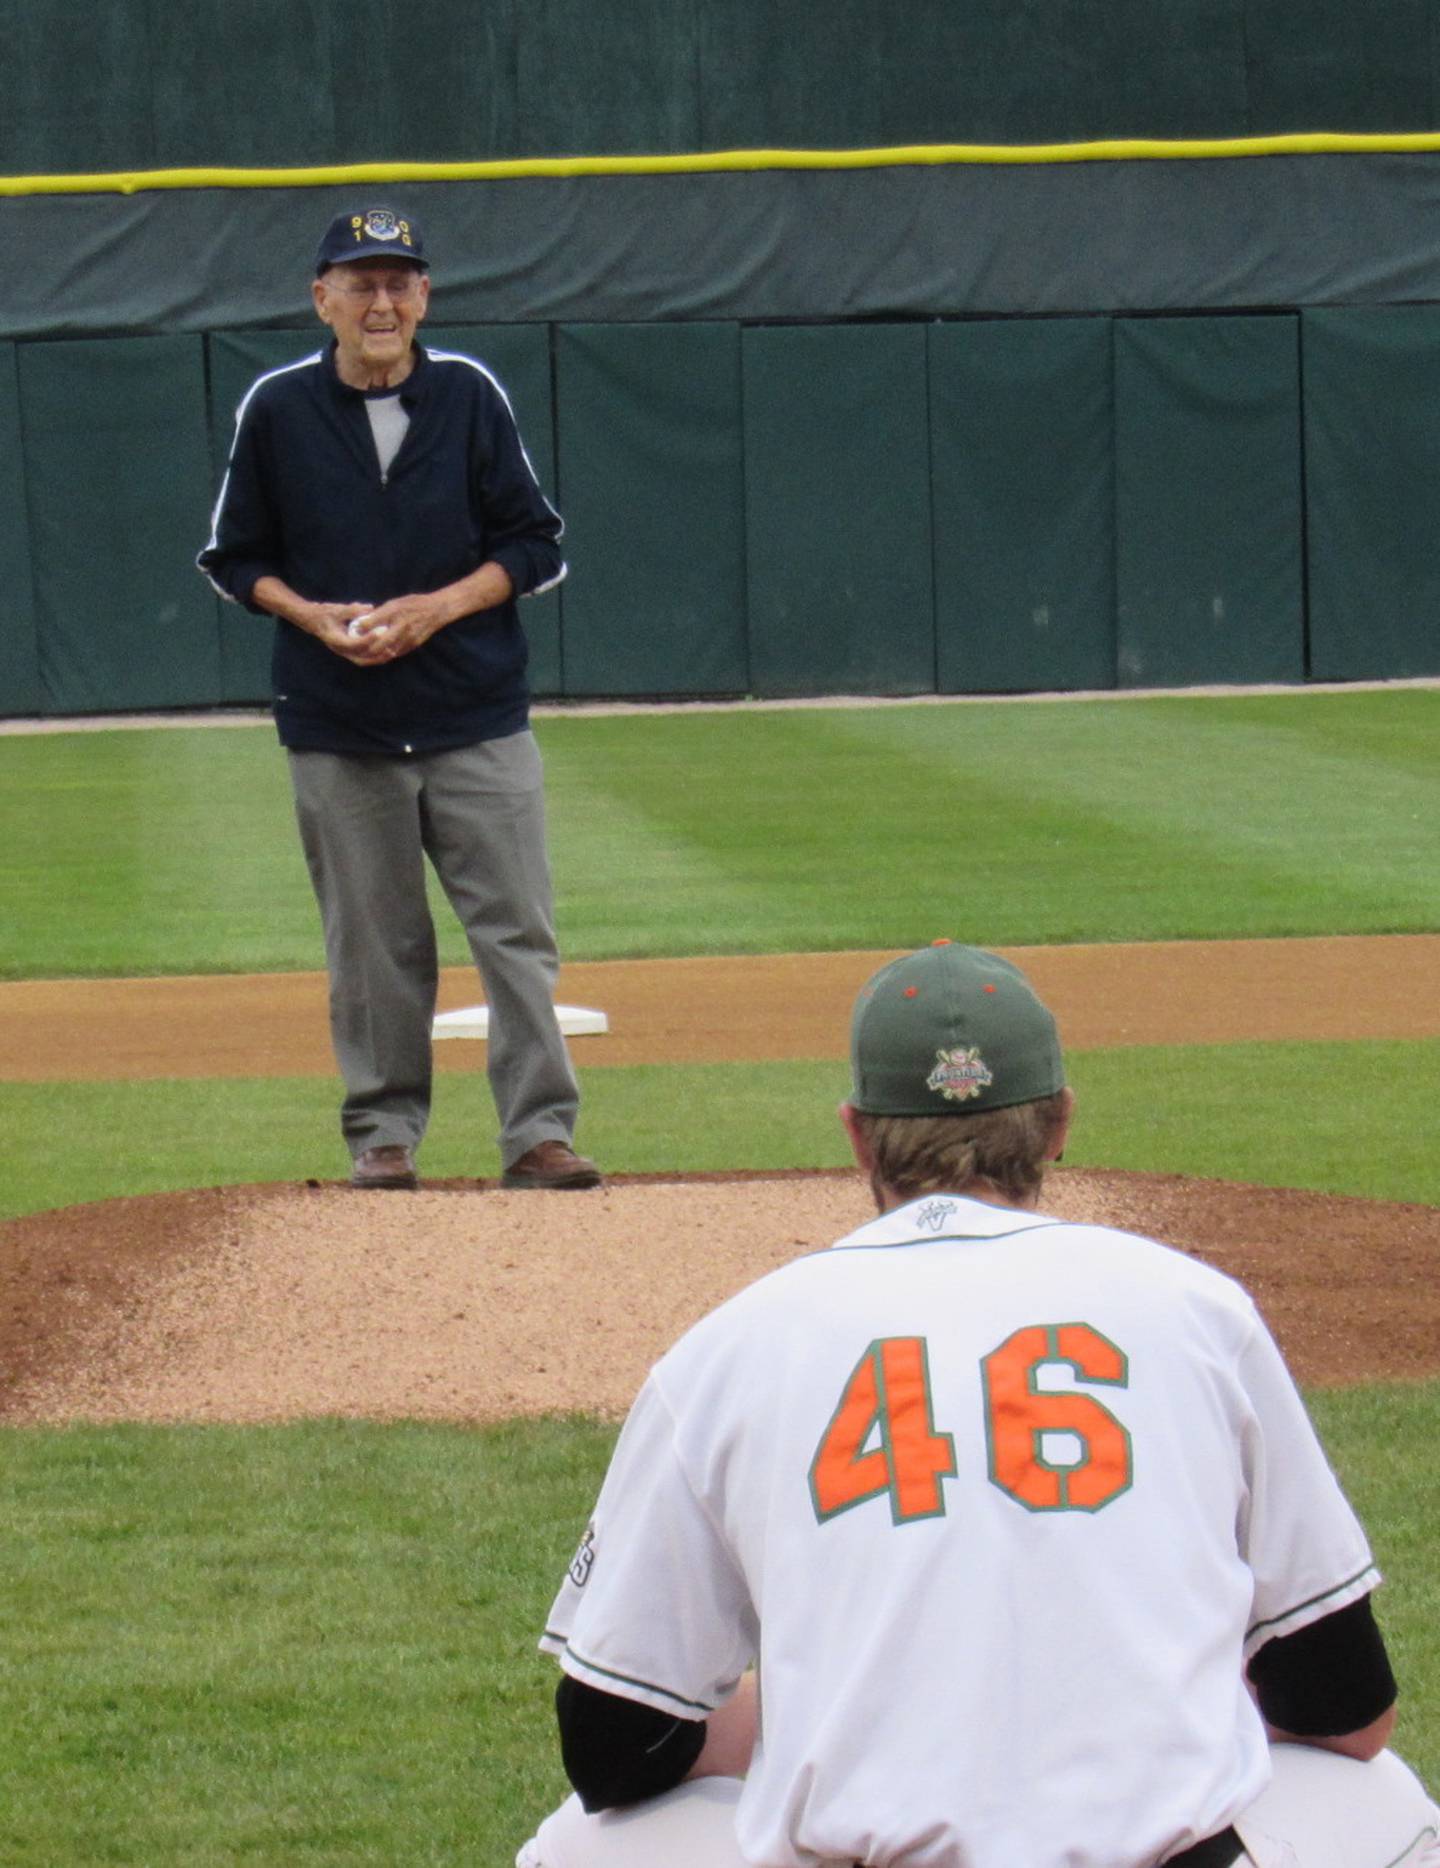 On his 91st birthday, Glenn Masek of Joliet threw out the first pitch at a Joliet Slammers game.